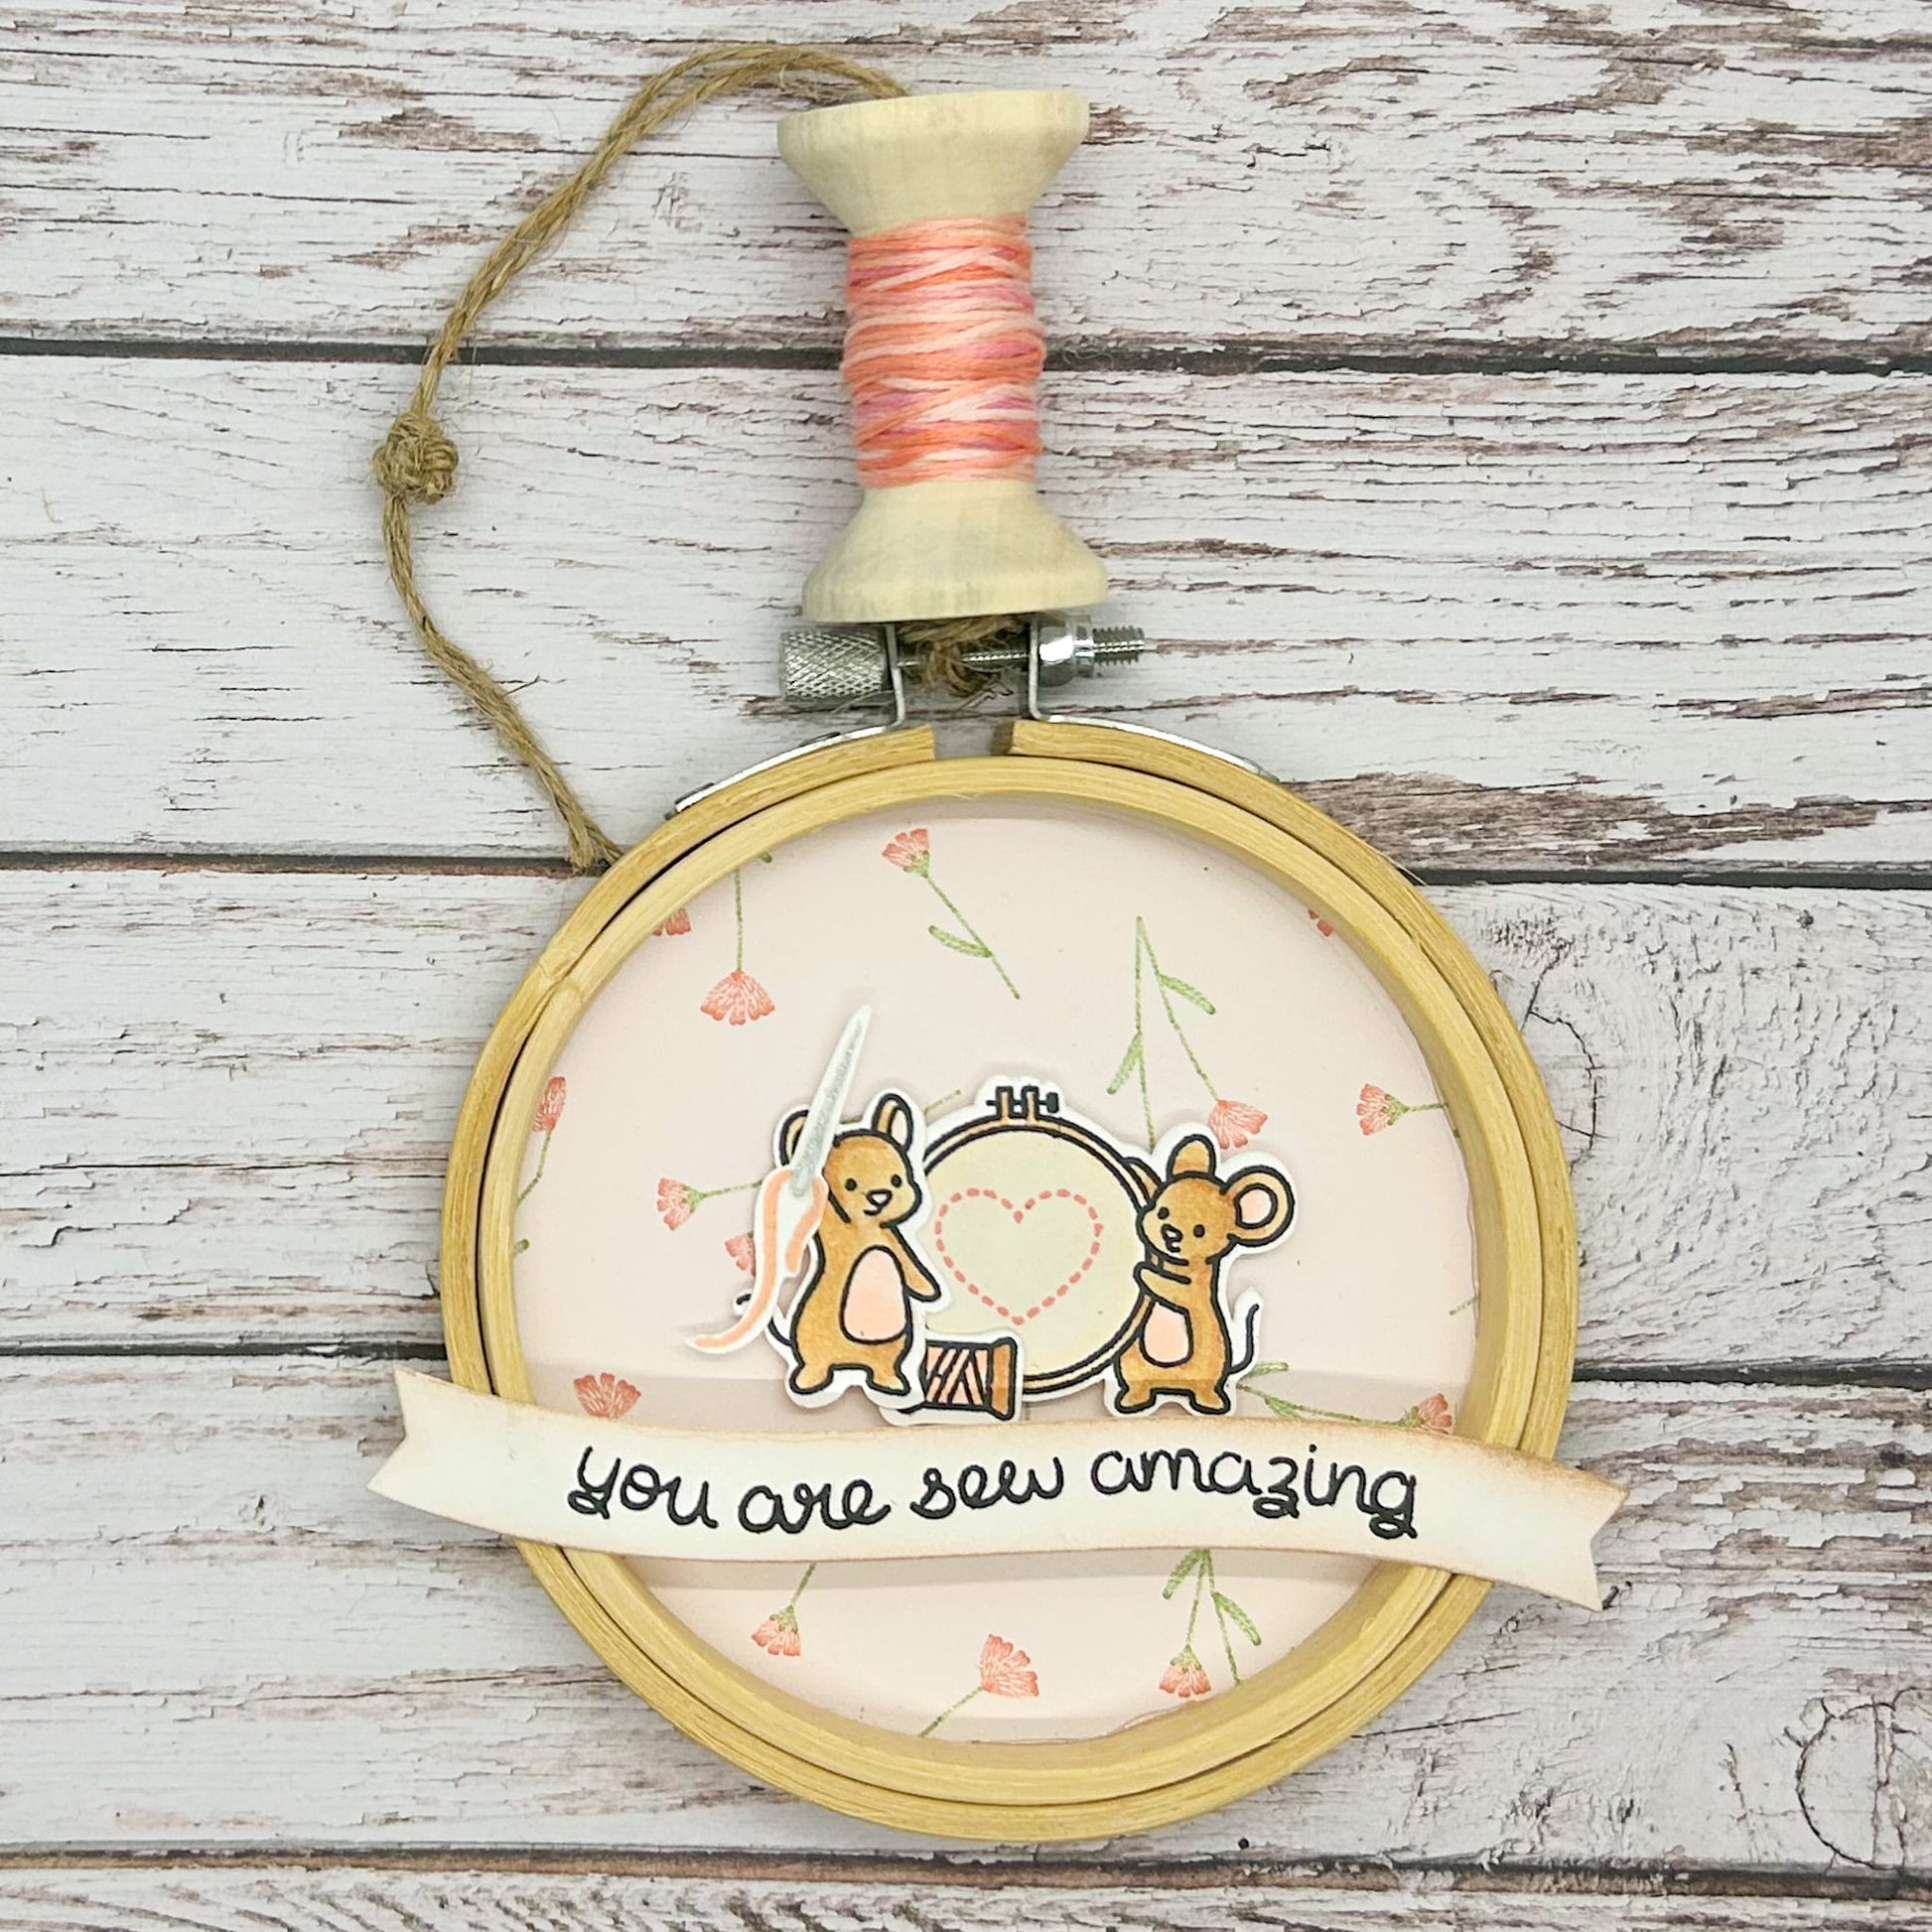 Cute Heart Mice Sew Amazing Embroidery Hoop Hanging Ornament